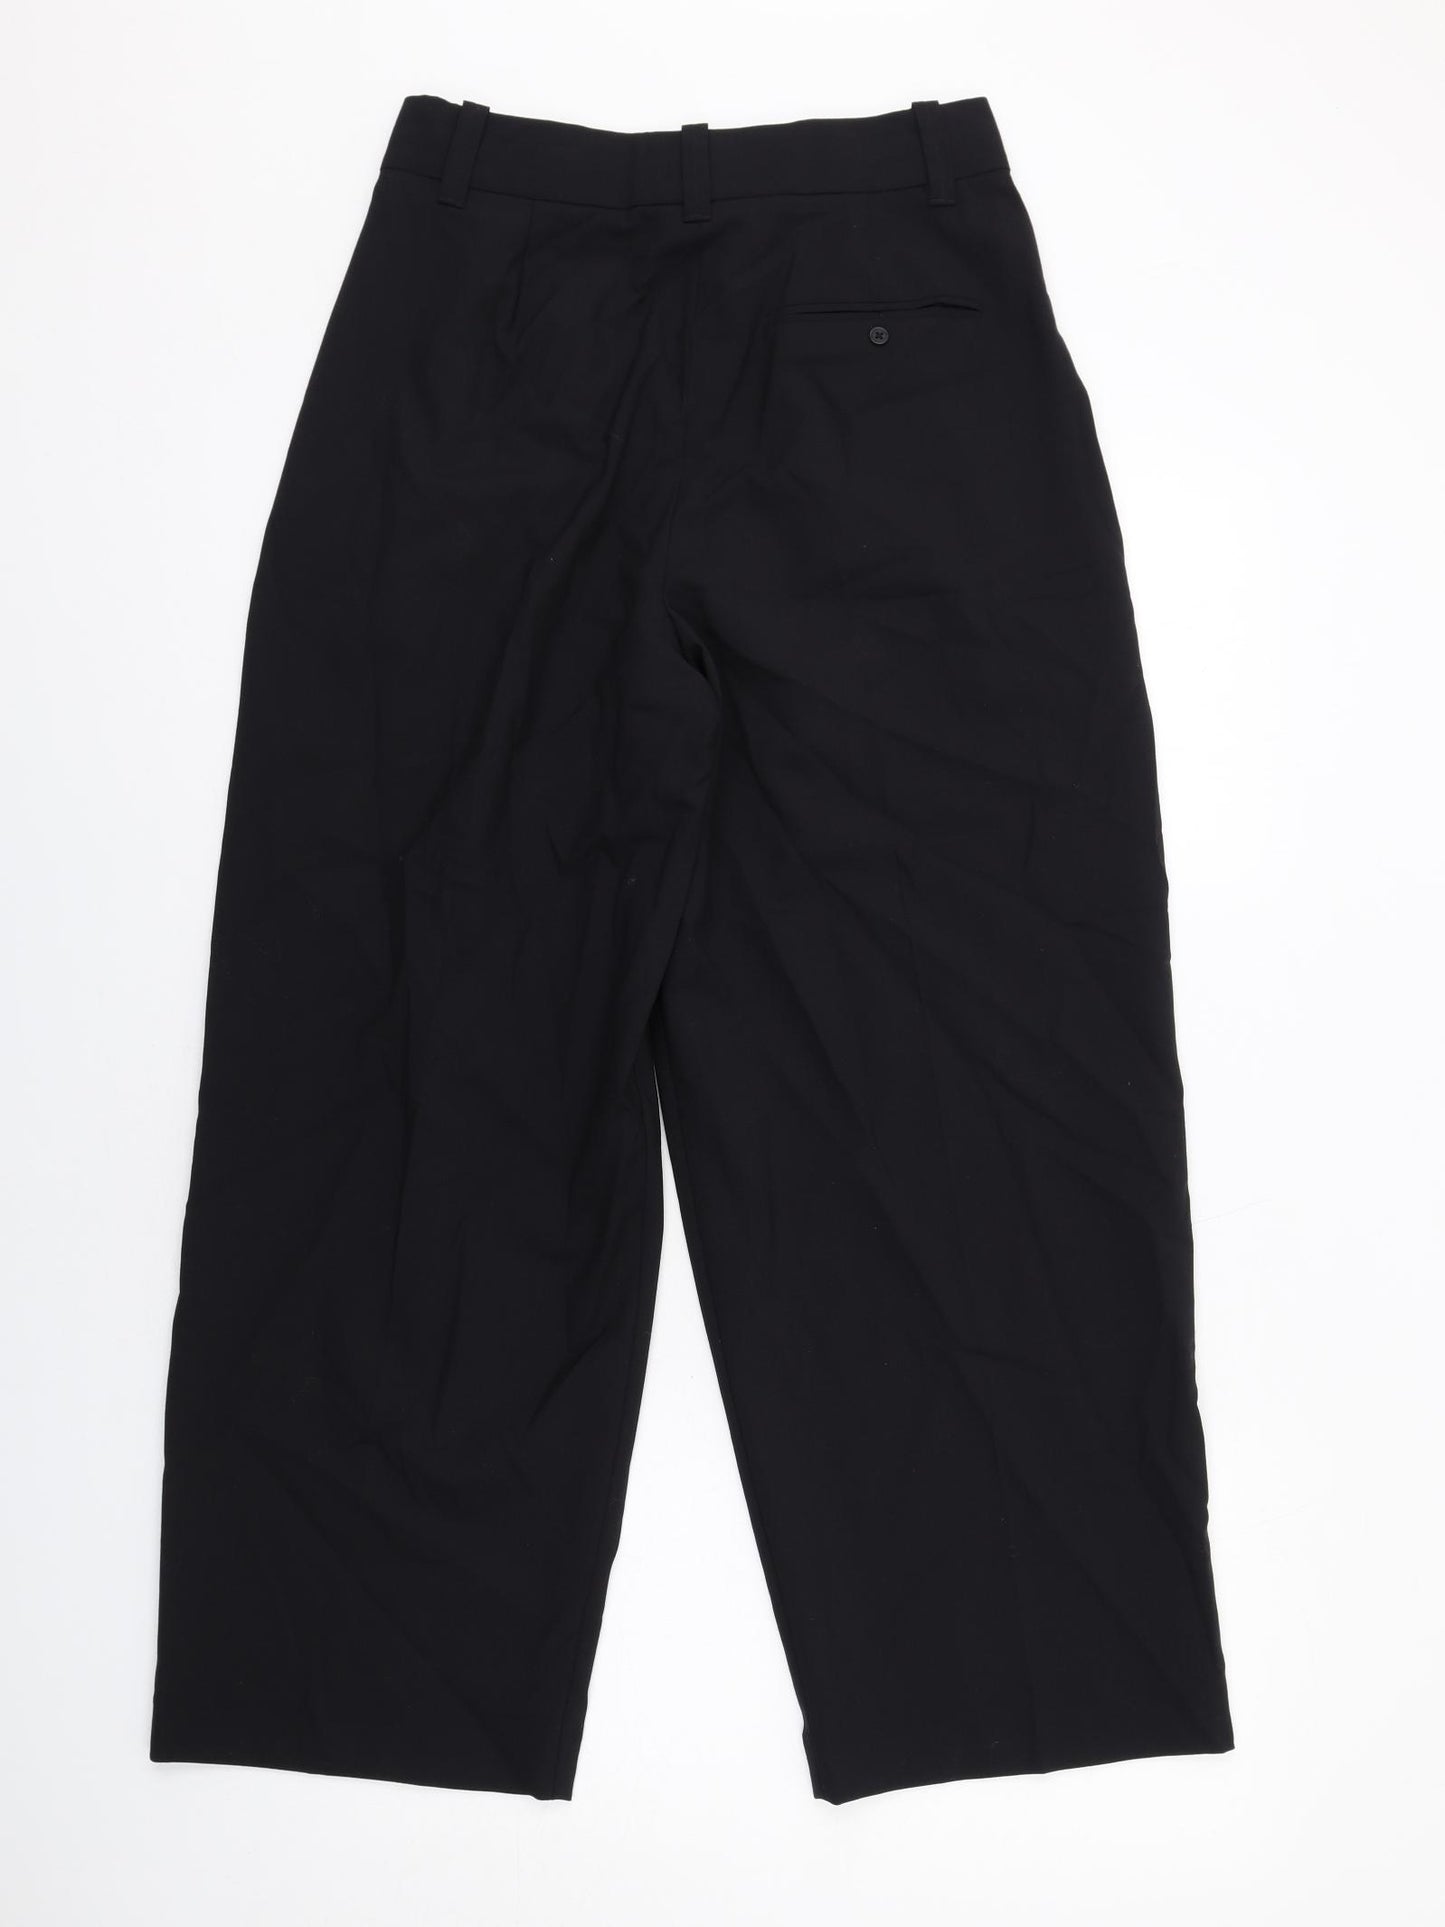 Marks and Spencer Womens Black Polyester Trousers Size 10 L28 in Regular Zip